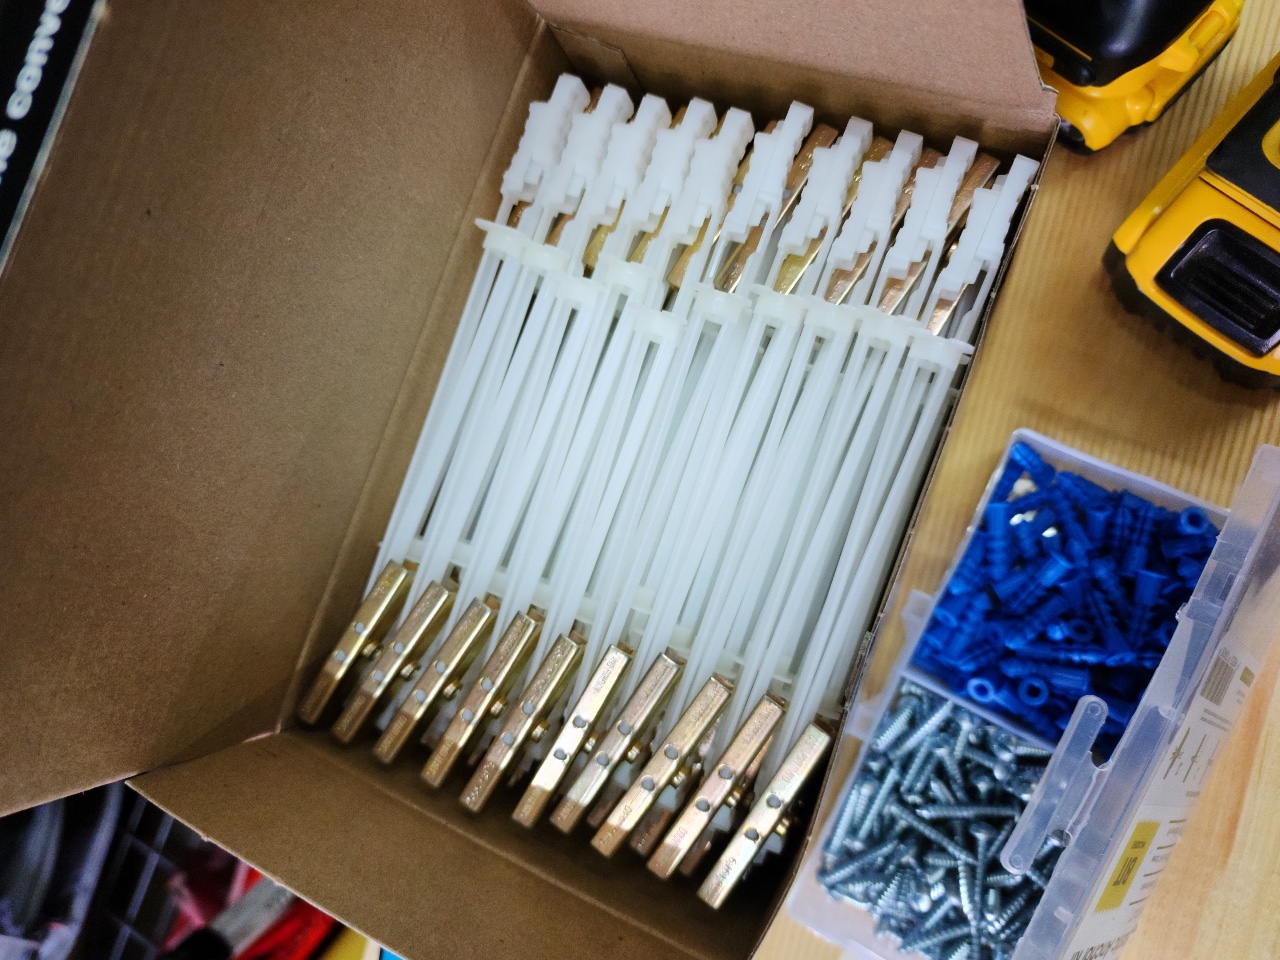 Open boxes of the best toggle bolt and plastic drywall anchors